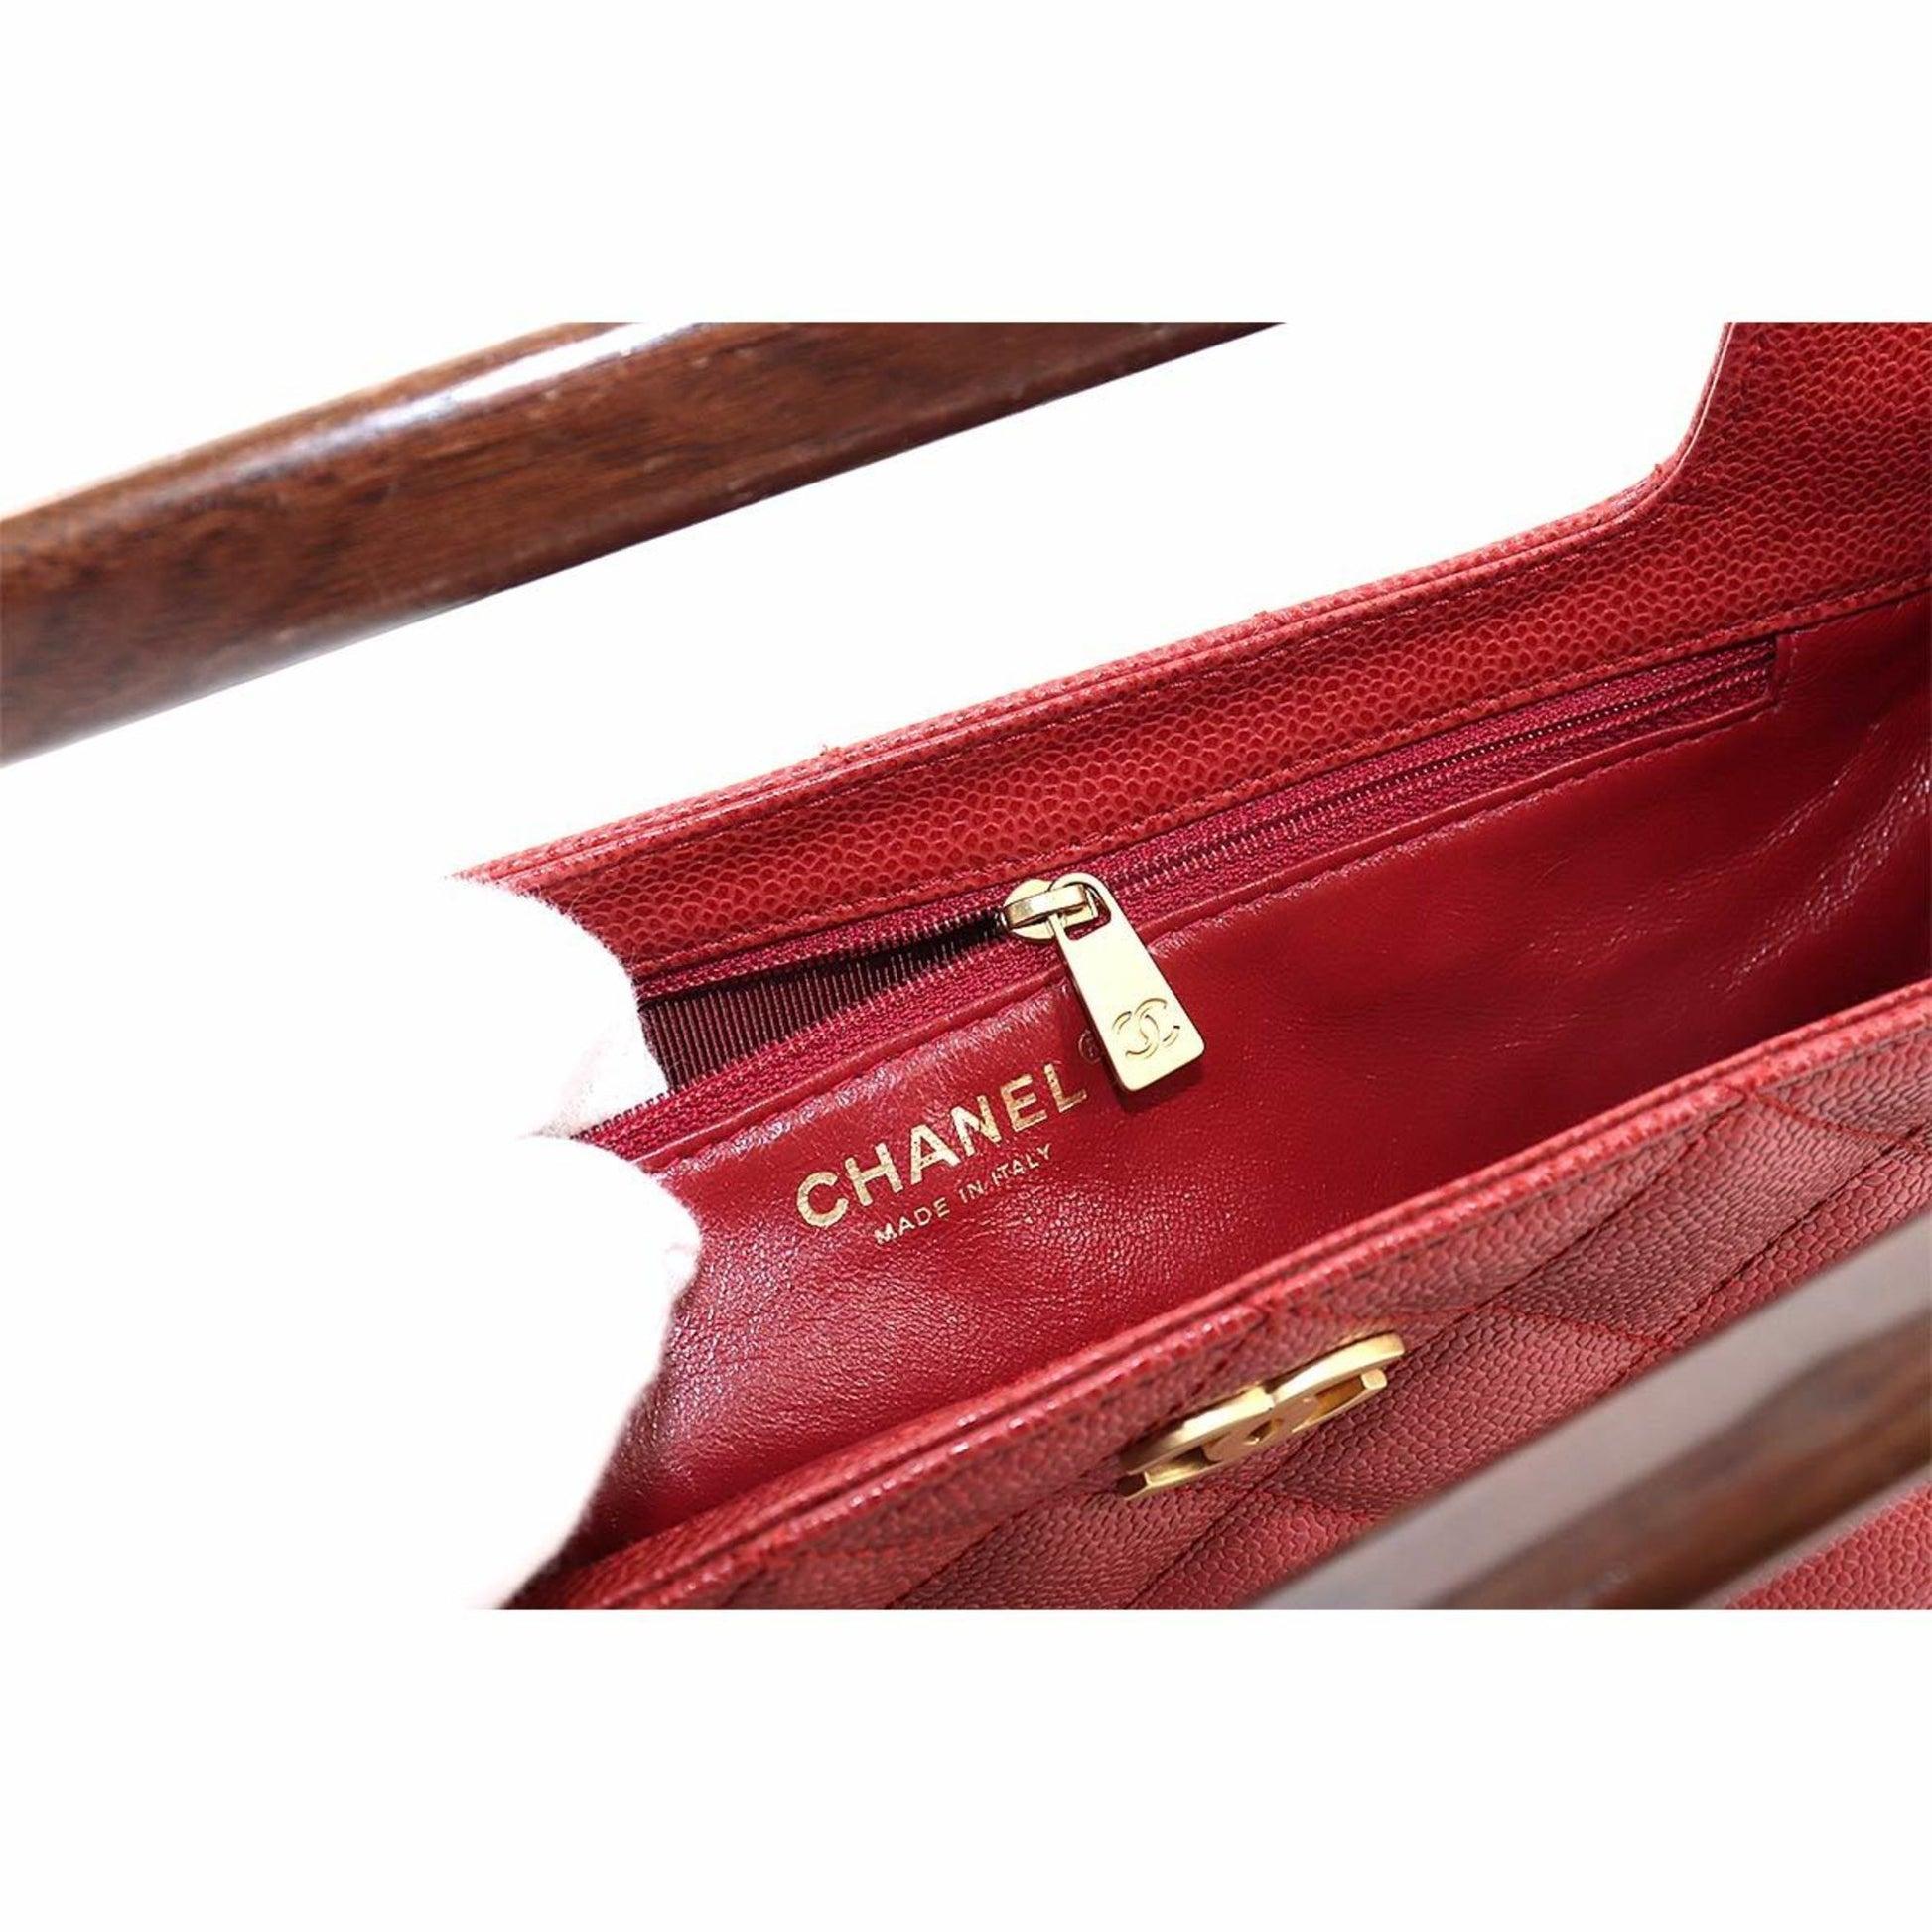 Chanel 2003 Holz Top Handle Rare Red Caviar Jumbo Kelly Envelope Clutch Tote Bag im Angebot 11